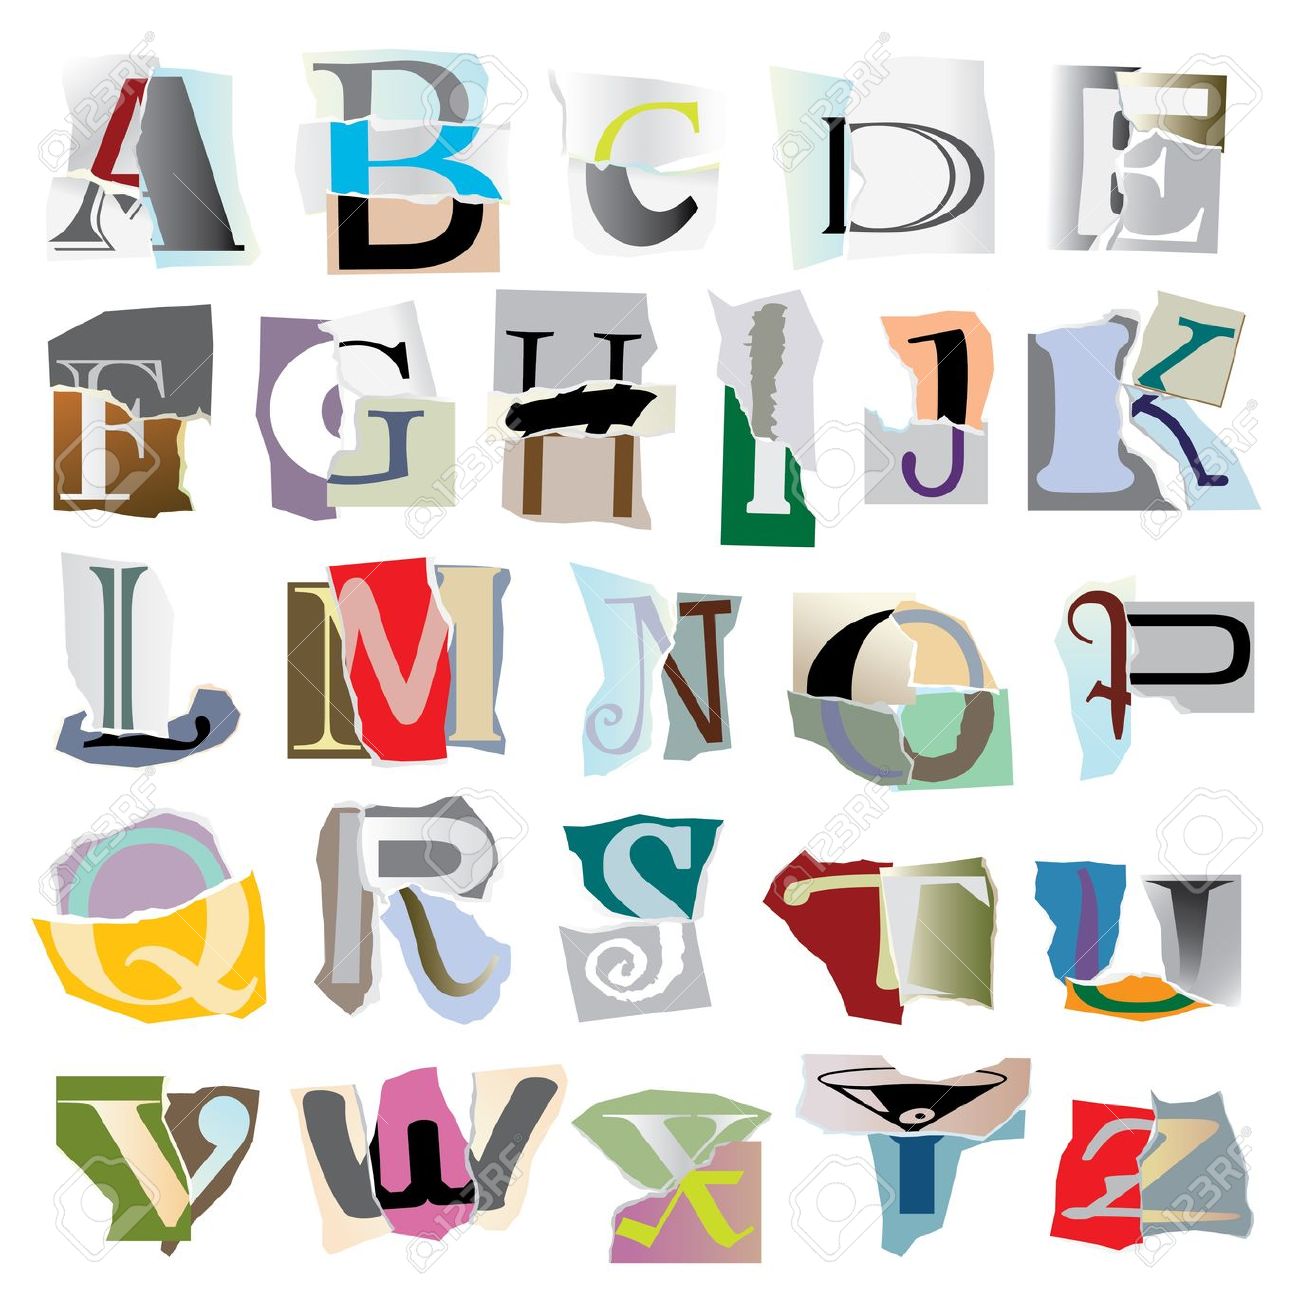 10573423-Alphabet-set-big-collage-latters-based-on-ripped-paper-pieces-Stock-Vector.jpg